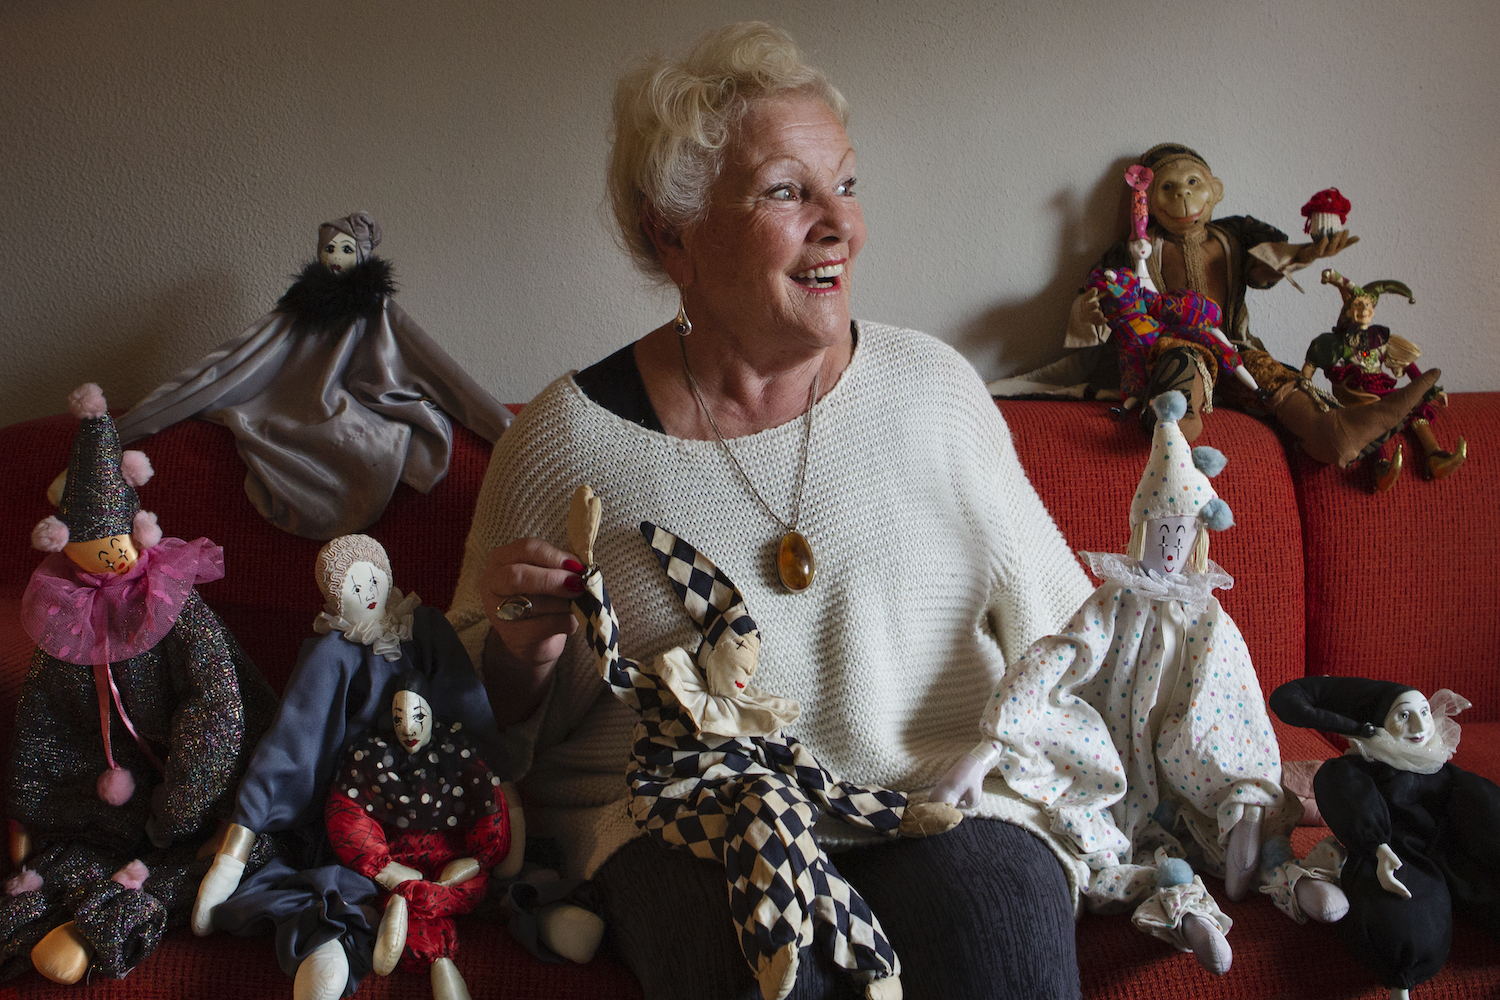 Artist Tilly Berghege smiles as she sits with various dolls she has created.